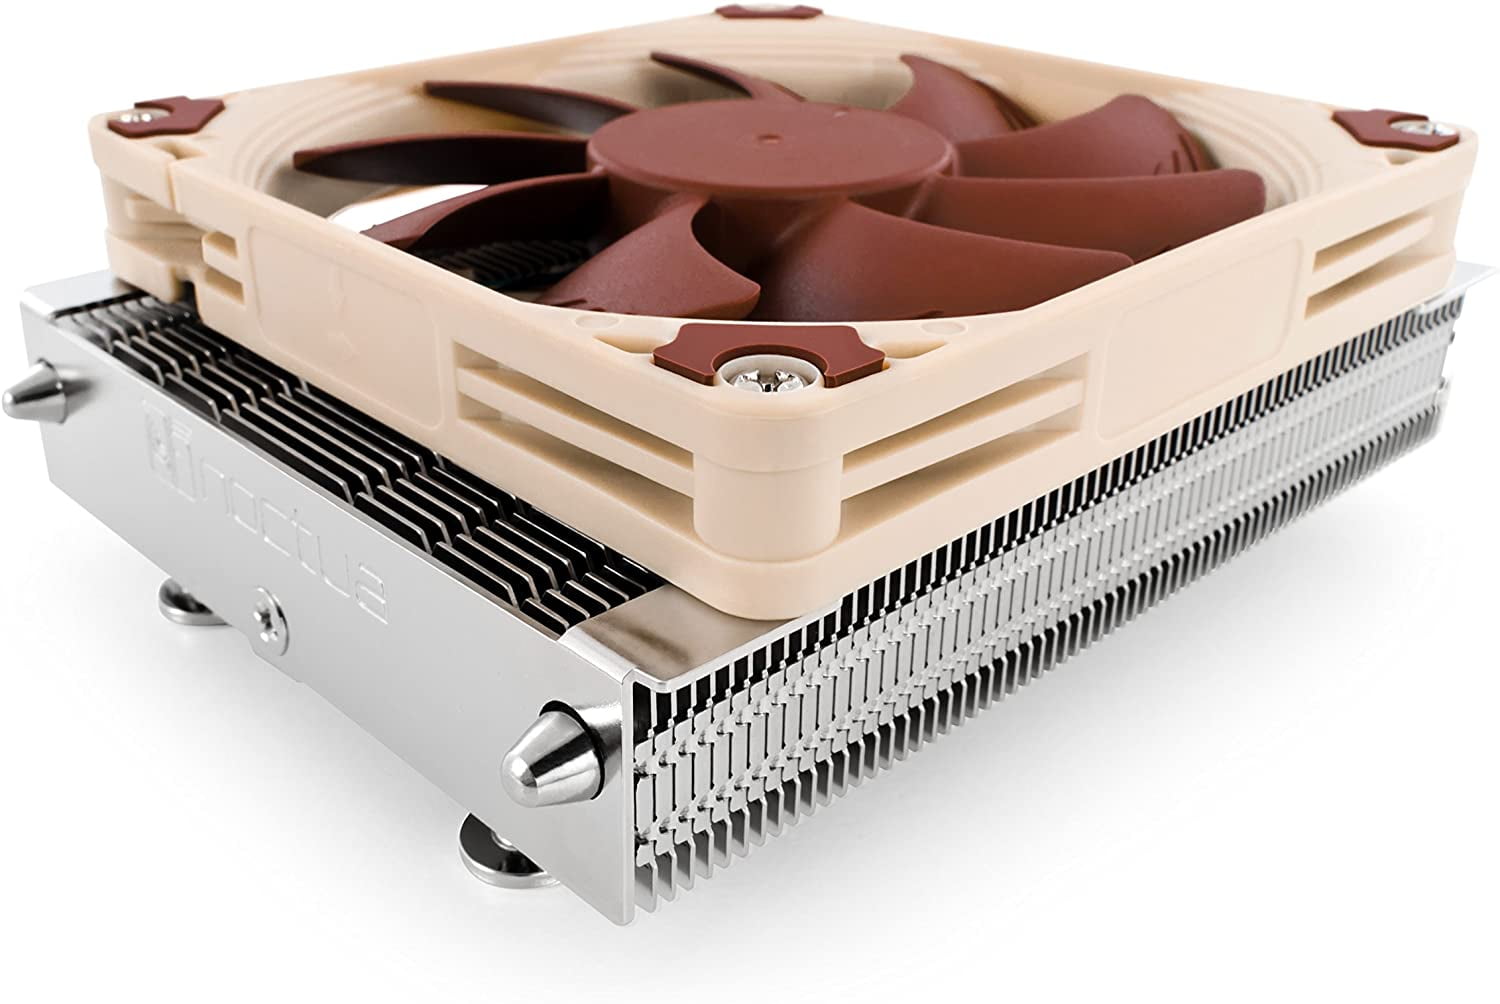 Noctua NH-L9a-AM4, Premium Low-Profile CPU Cooler for AMD AM4 (Brown), Only 37mm total height, ideal for slim HTPC cases and Small Form Factor (SFF) builds By Visit the Noctua Store Walmart.com